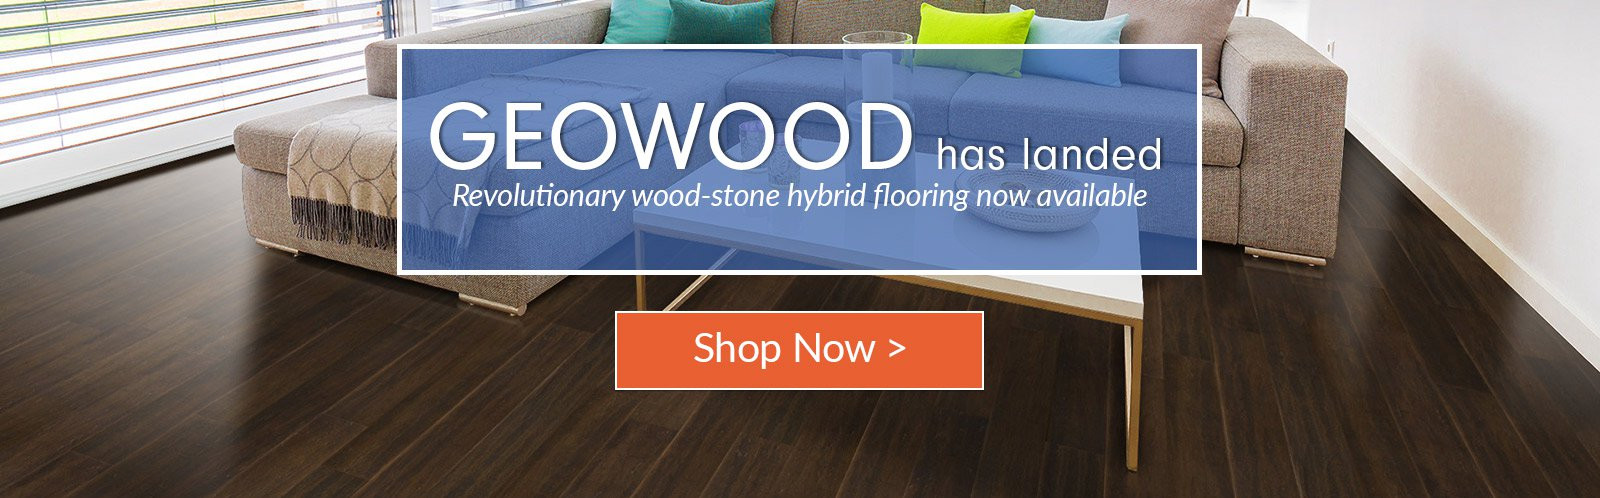 29 Famous Hardwood Floor Supply Dallas 2024 free download hardwood floor supply dallas of green building construction materials and home decor cali bamboo with regard to geowood launch homepage slider